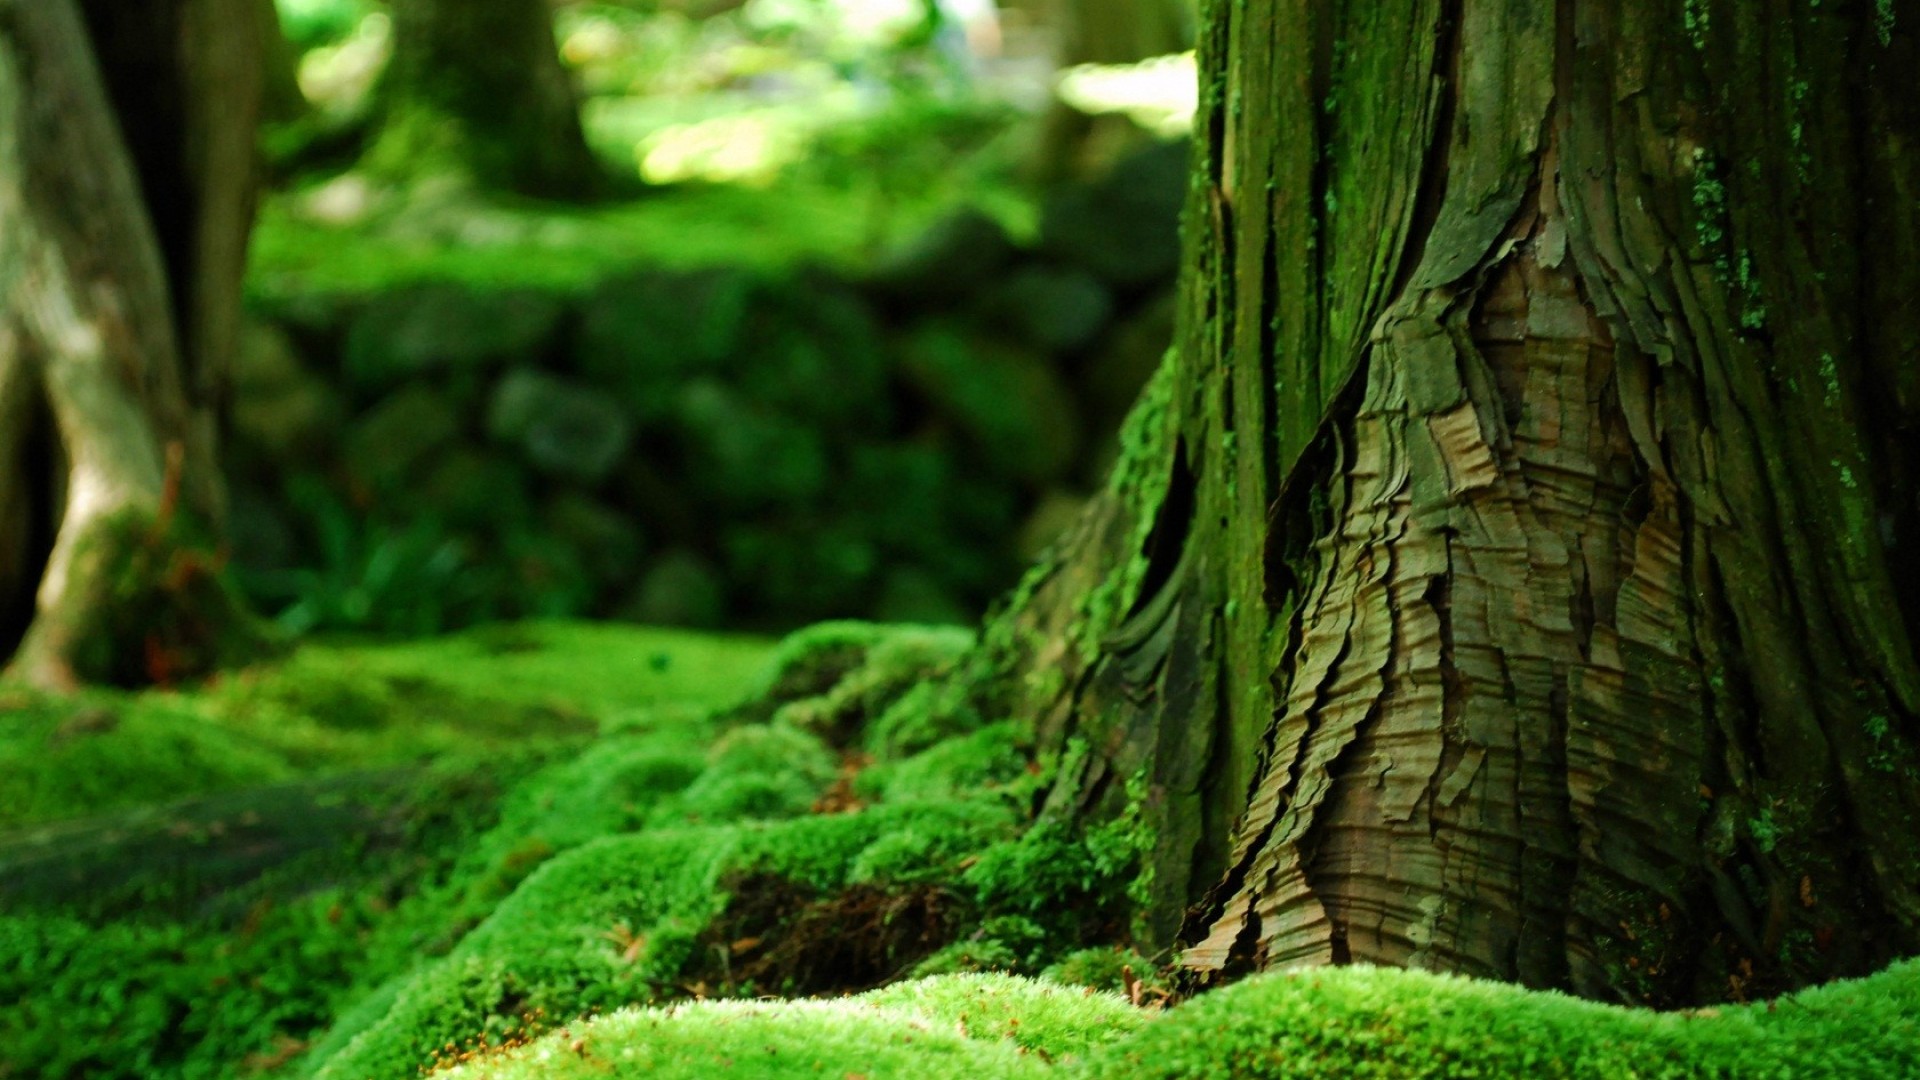 Desktop Green Nature High Quality Cool With Hd Images Free Download ...